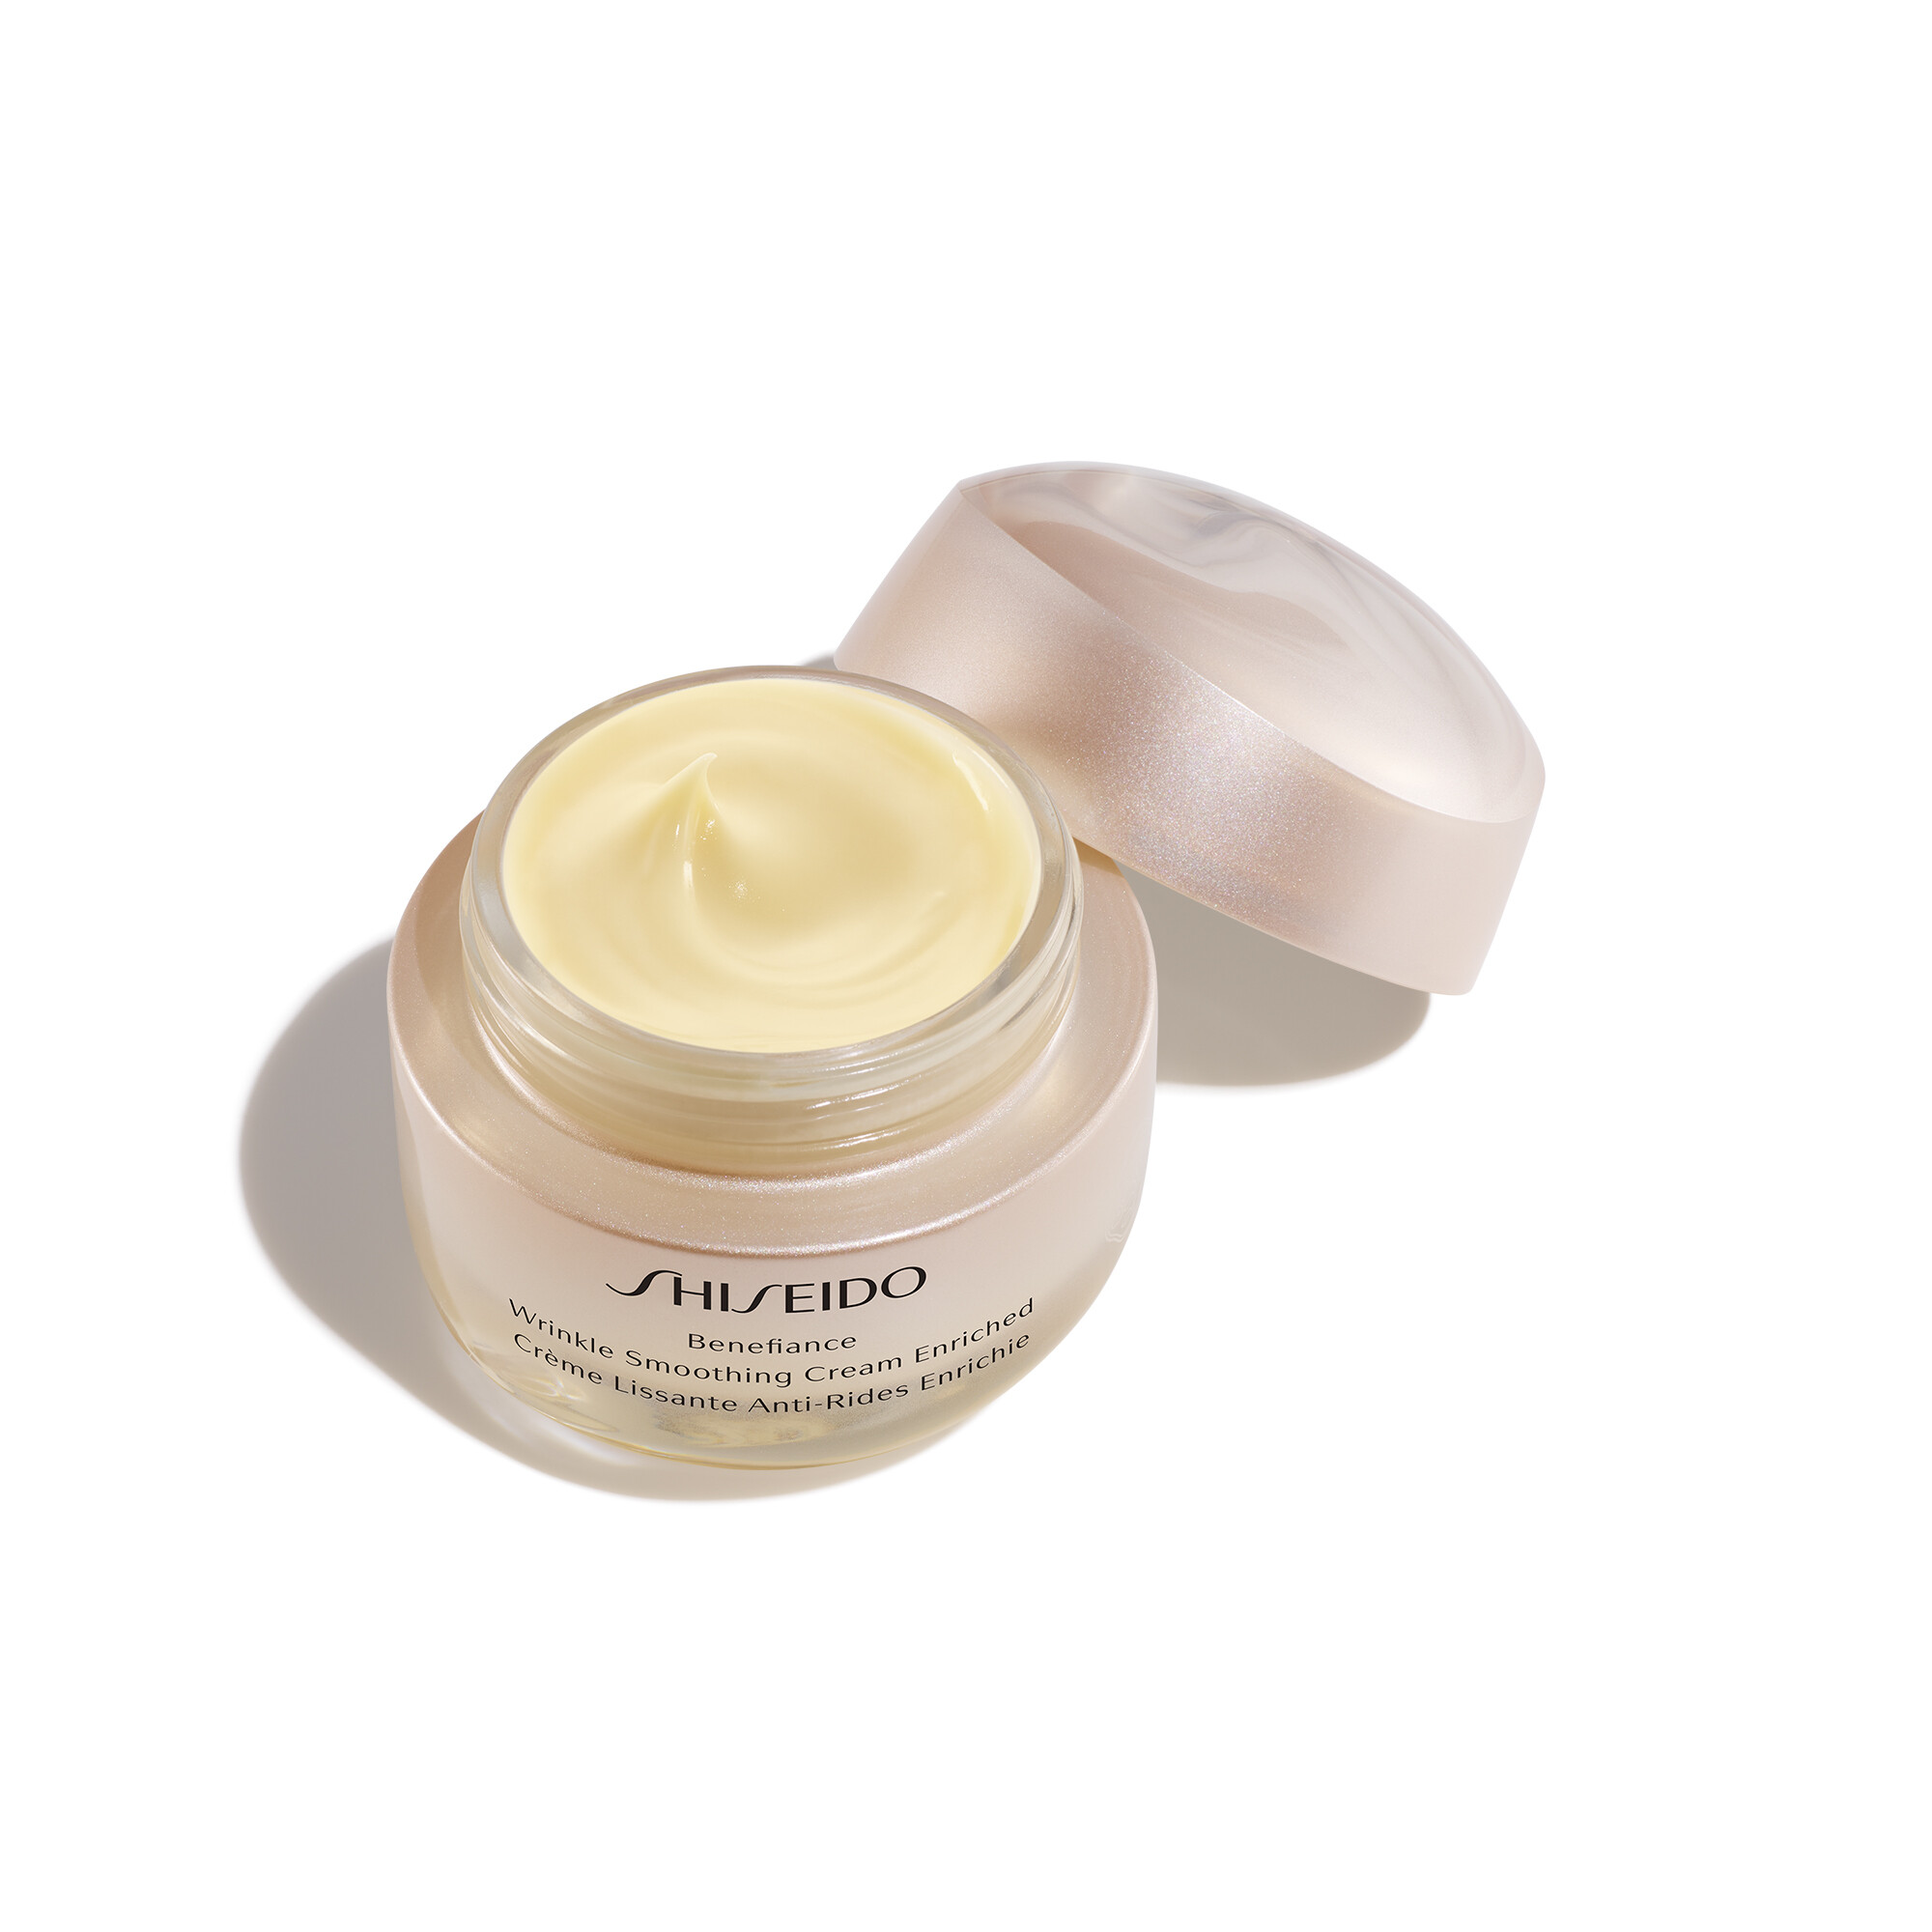 Tagescreme Shiseido Benefiance Wrinkle Smoothing Cream Enriched Thiemann